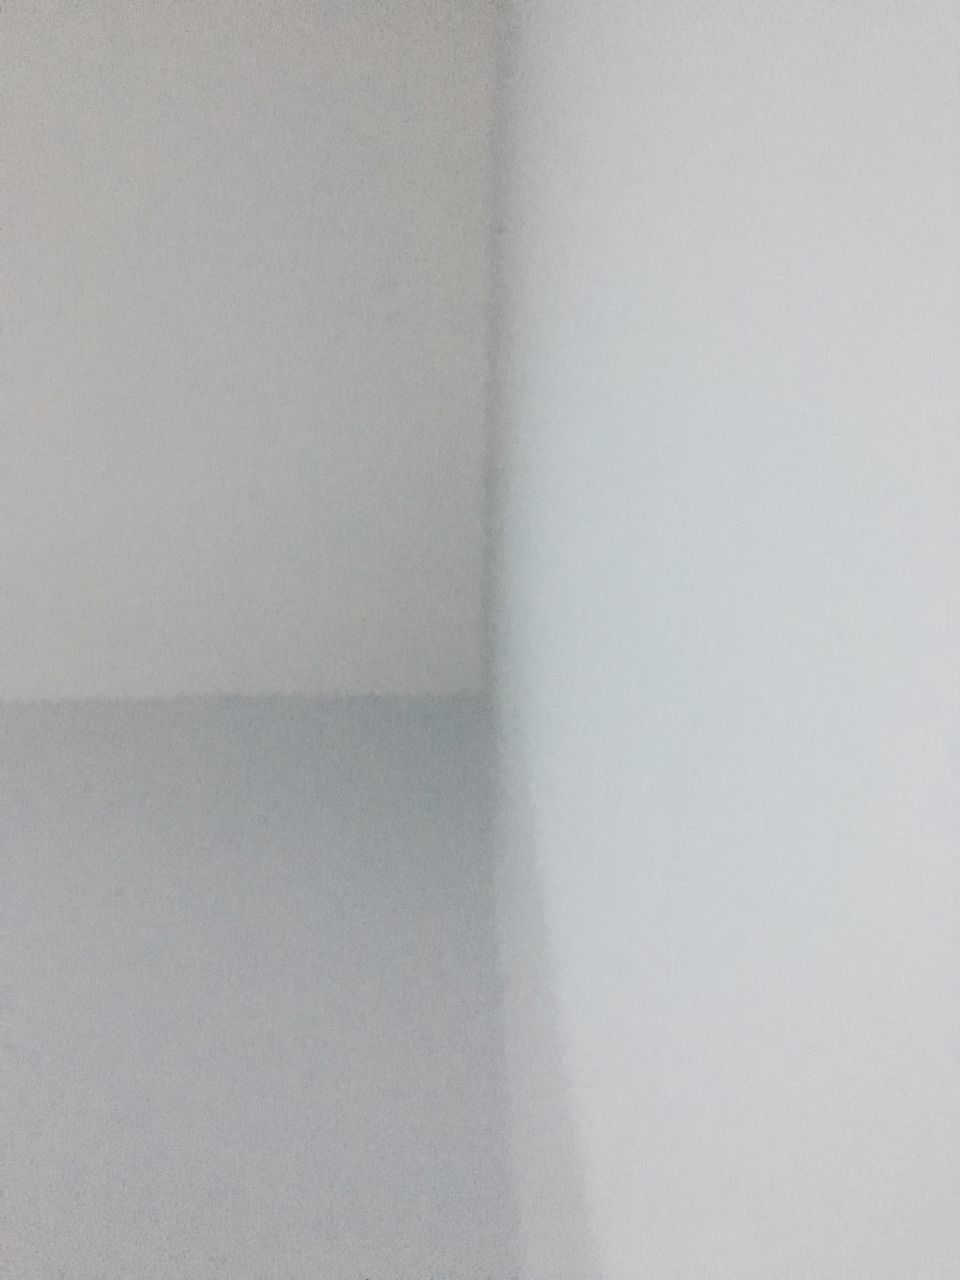 FULL FRAME SHOT OF WHITE WALL WITH EMPTY AND BLUE BACKGROUND